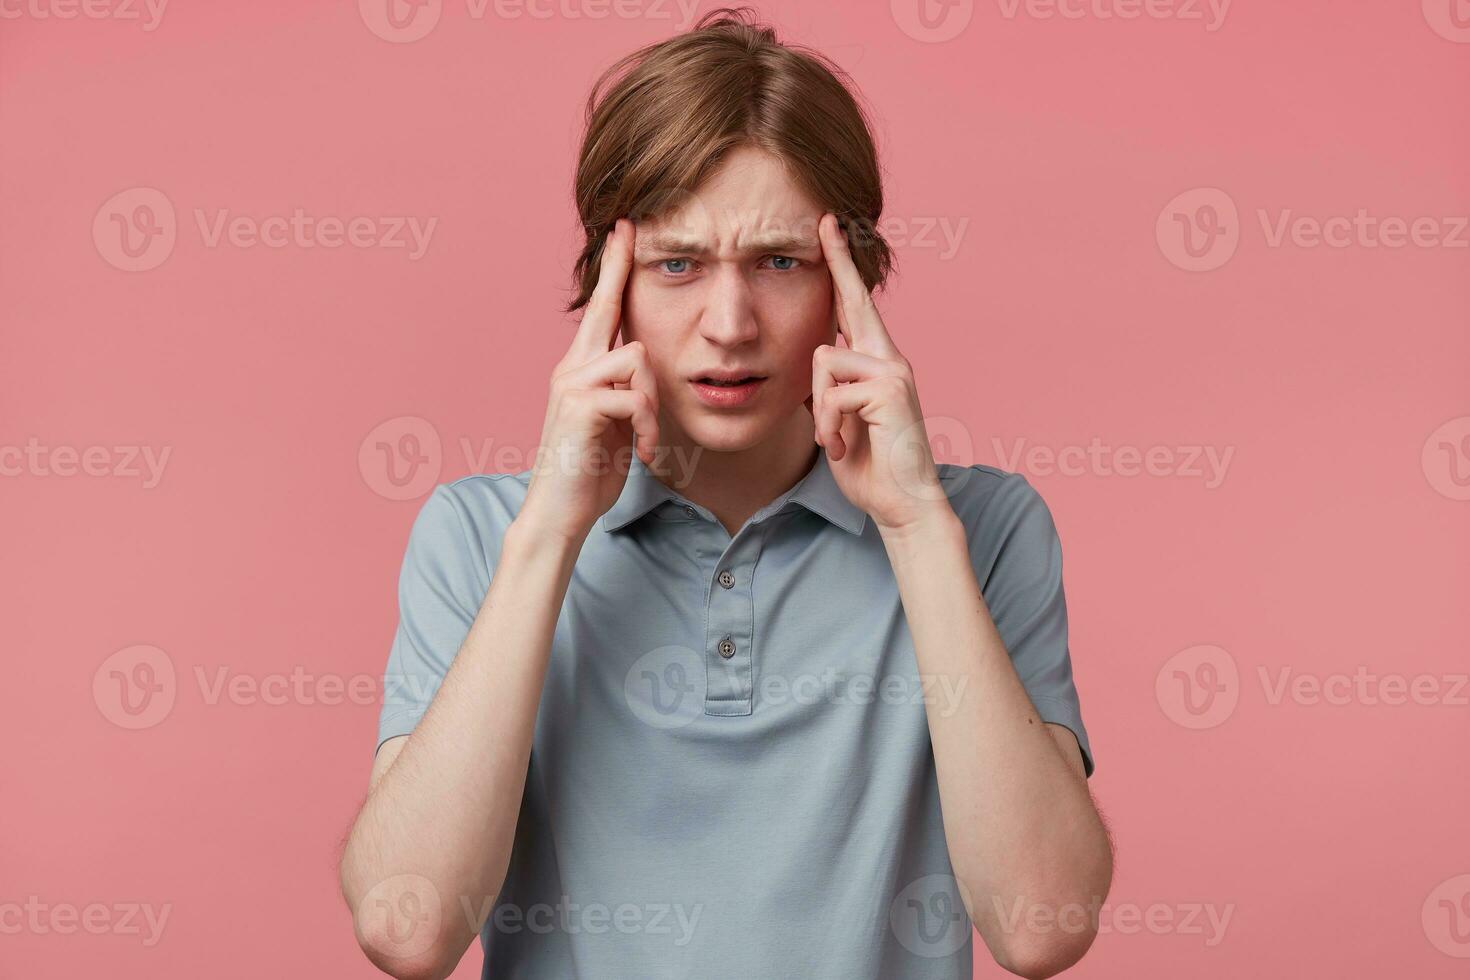 Portrait young man thinking, trying hard to remember something looking focused, fingers on temples isolated pink background. Negative emotion facial expressions. Short-term memory loss photo